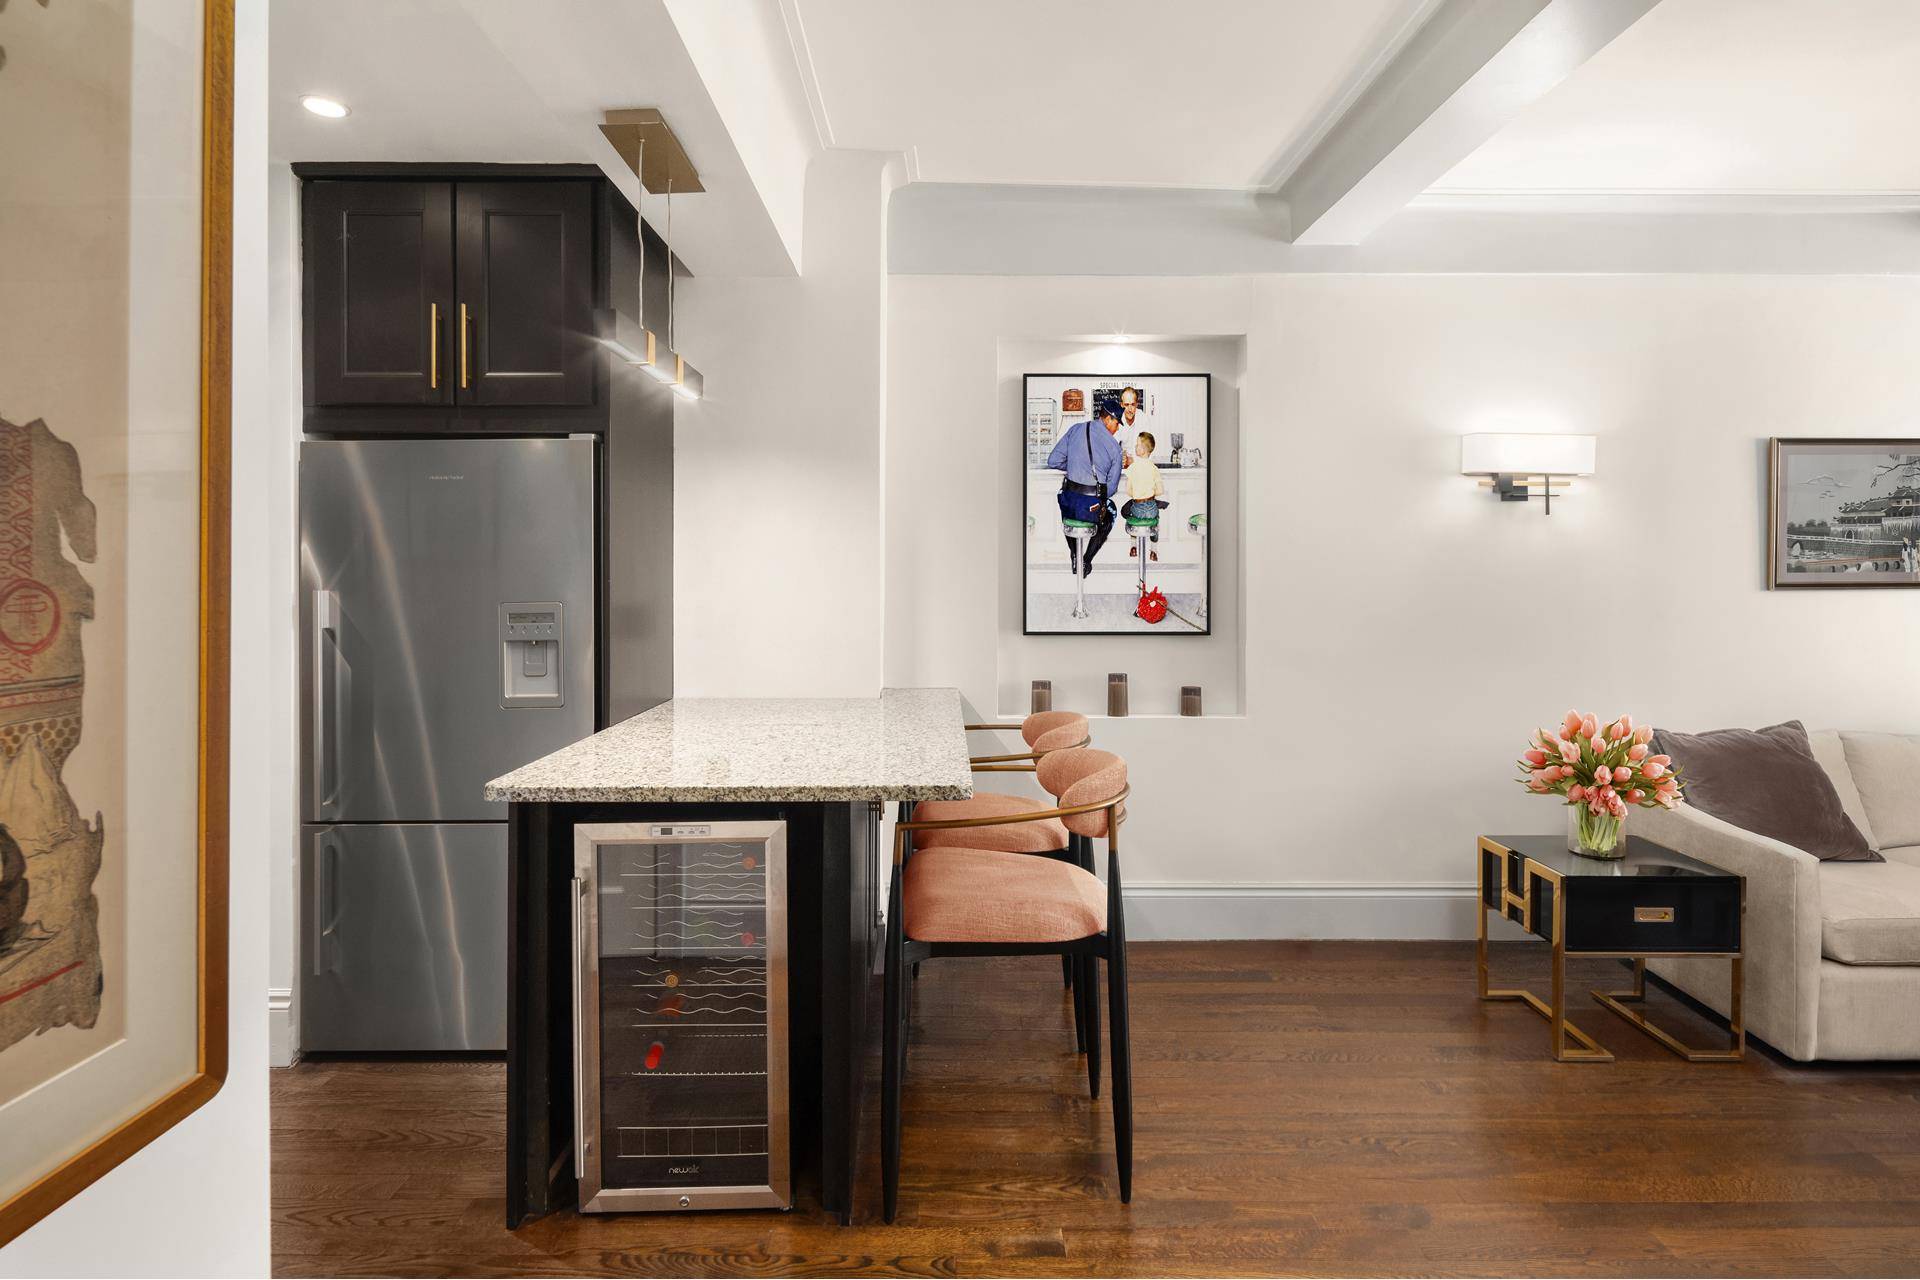 Overlooking Park Avenue and the Empire State Building, residence 121 distinguishes itself as a unique opportunity to own a renovated open and bright one bedroom in Emory Roth's highly acclaimed ...